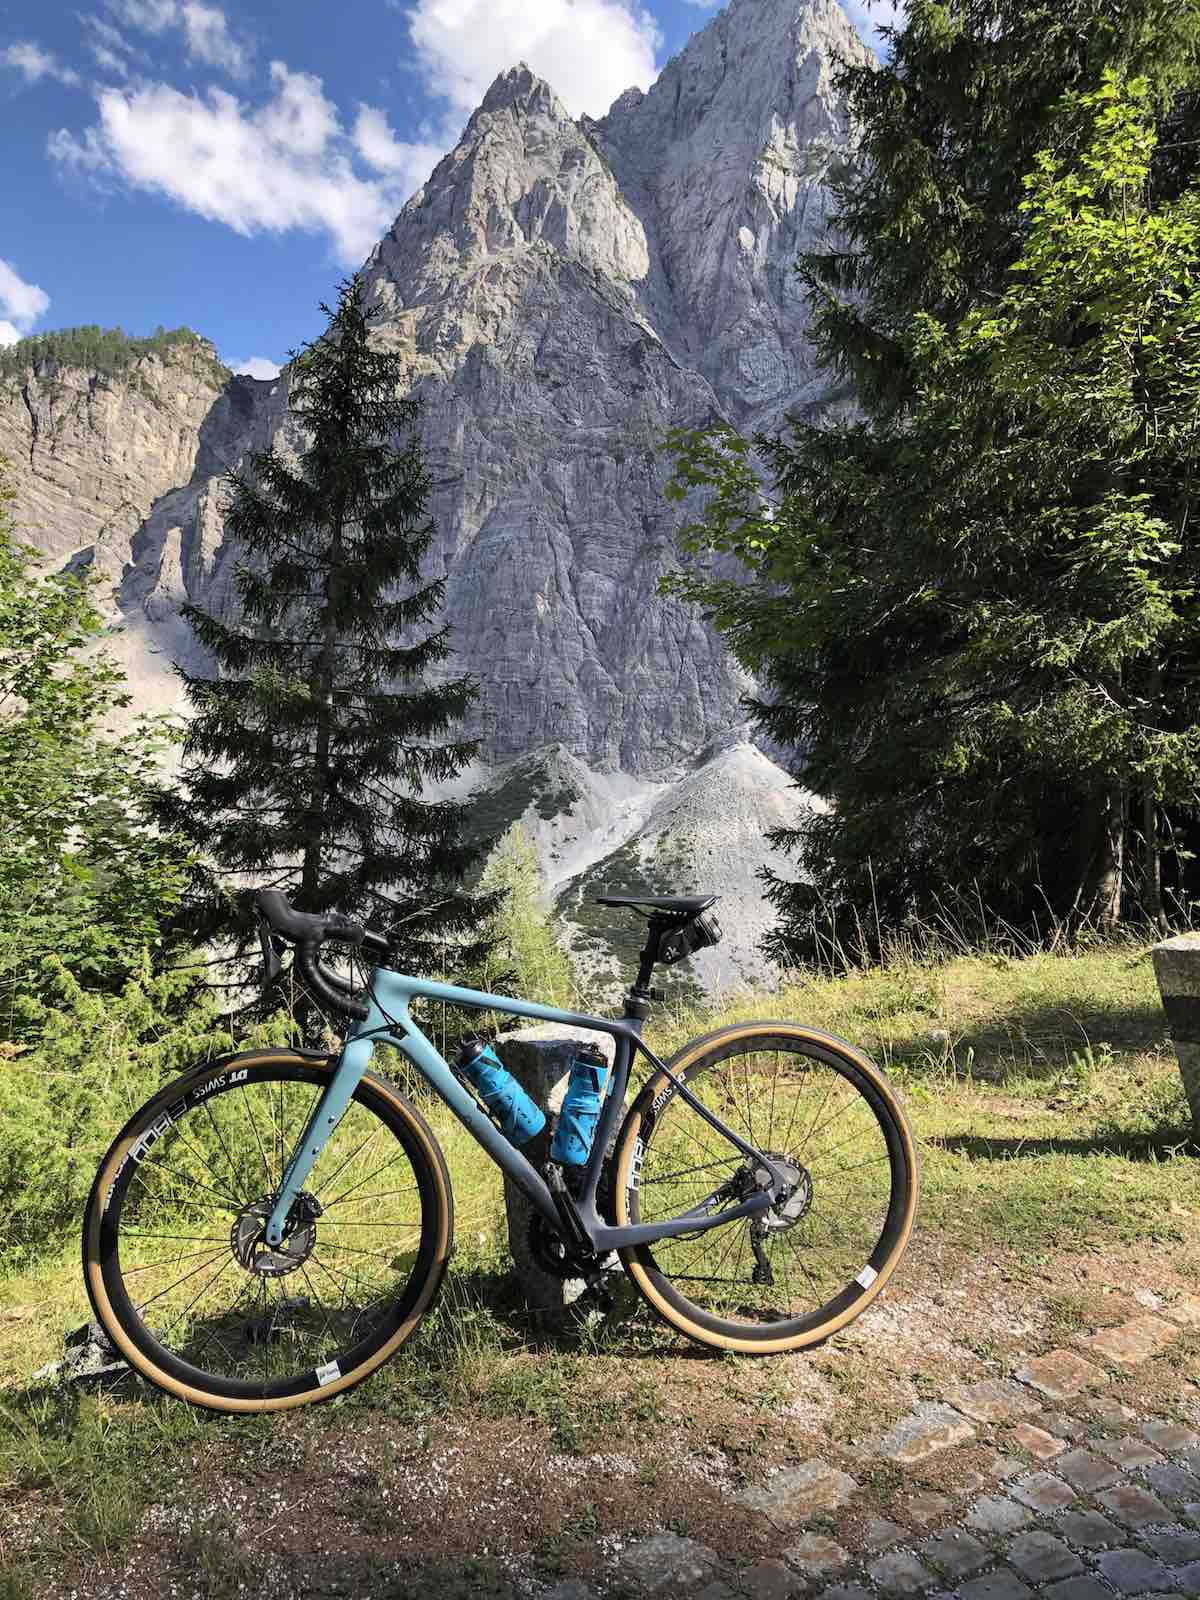 bikerumor pic of the day bicycle posed in front of the vrsic pass, large pine trees and the sharp rocky julien alps in slovenia